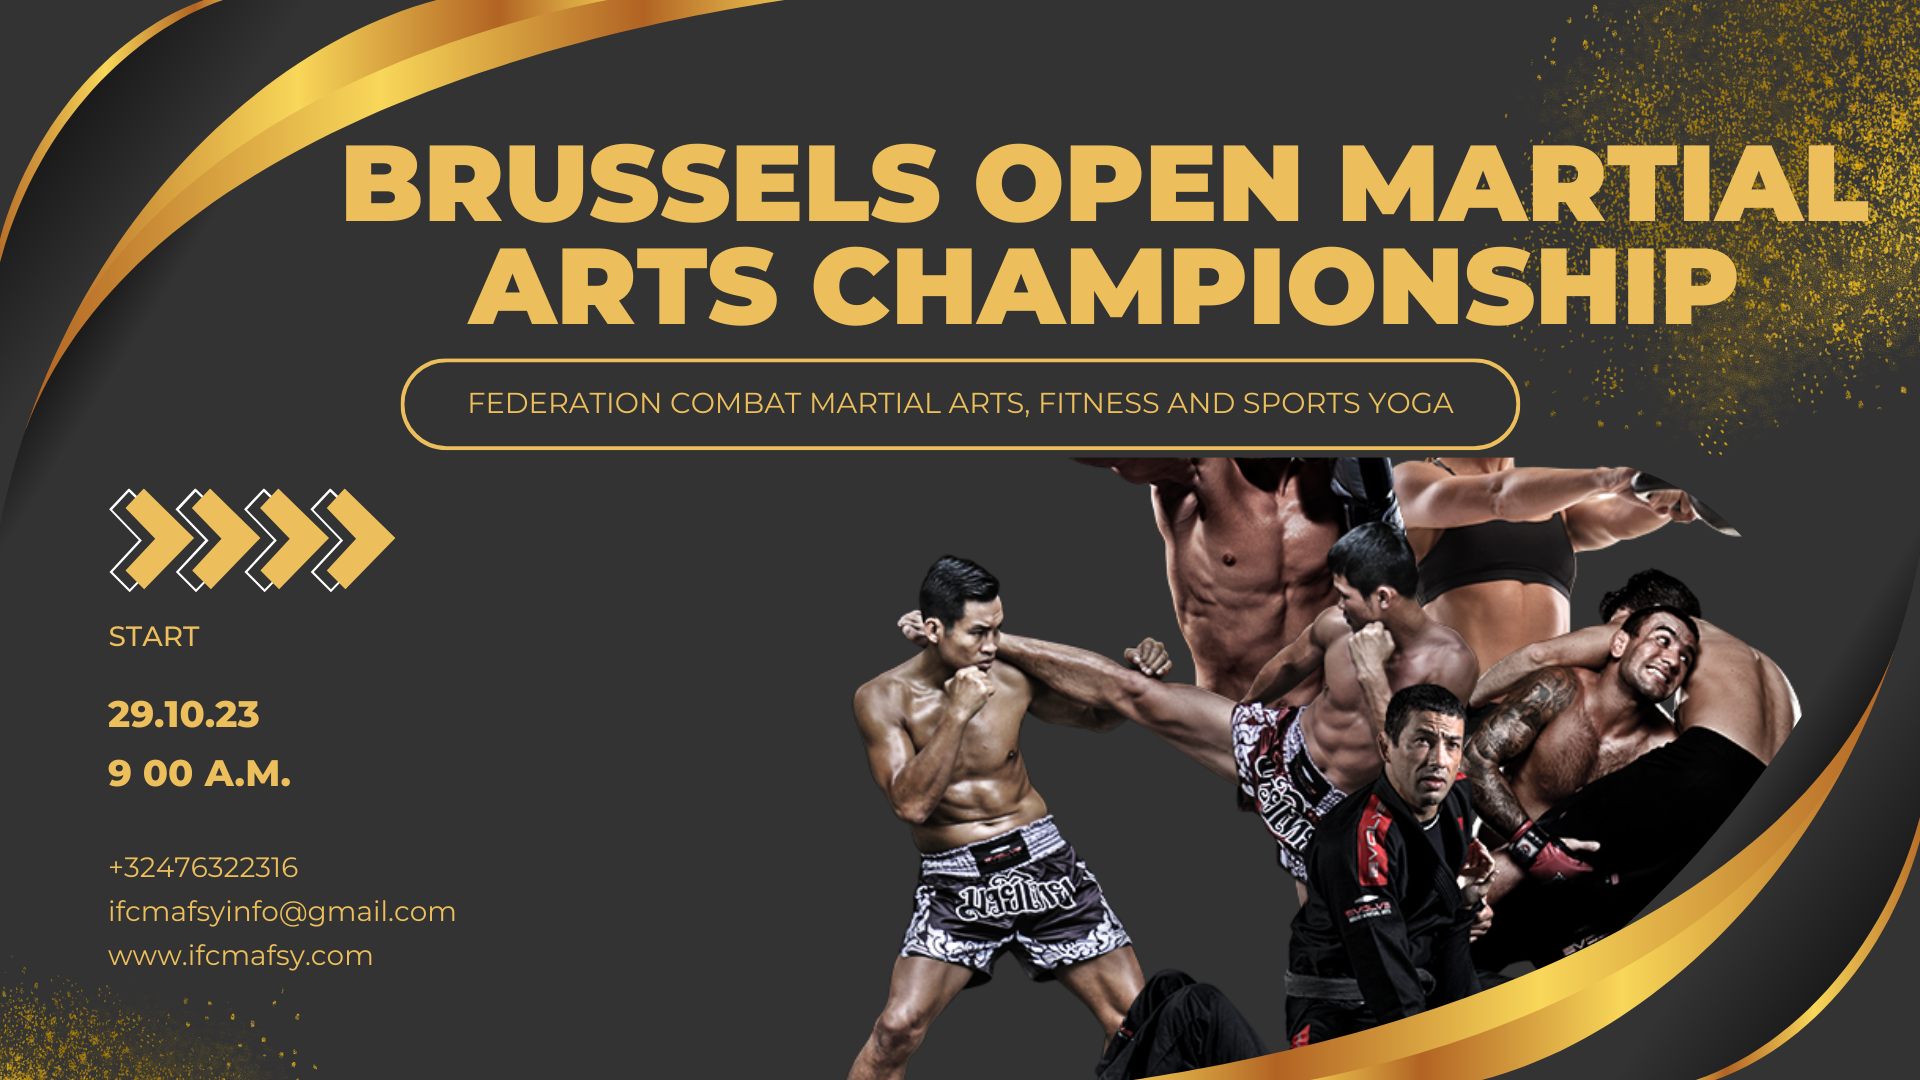 The first Brussels Open Martial Arts Championship (amateur league of the Federation of Martial Arts, Fitness and Sports Yoga).